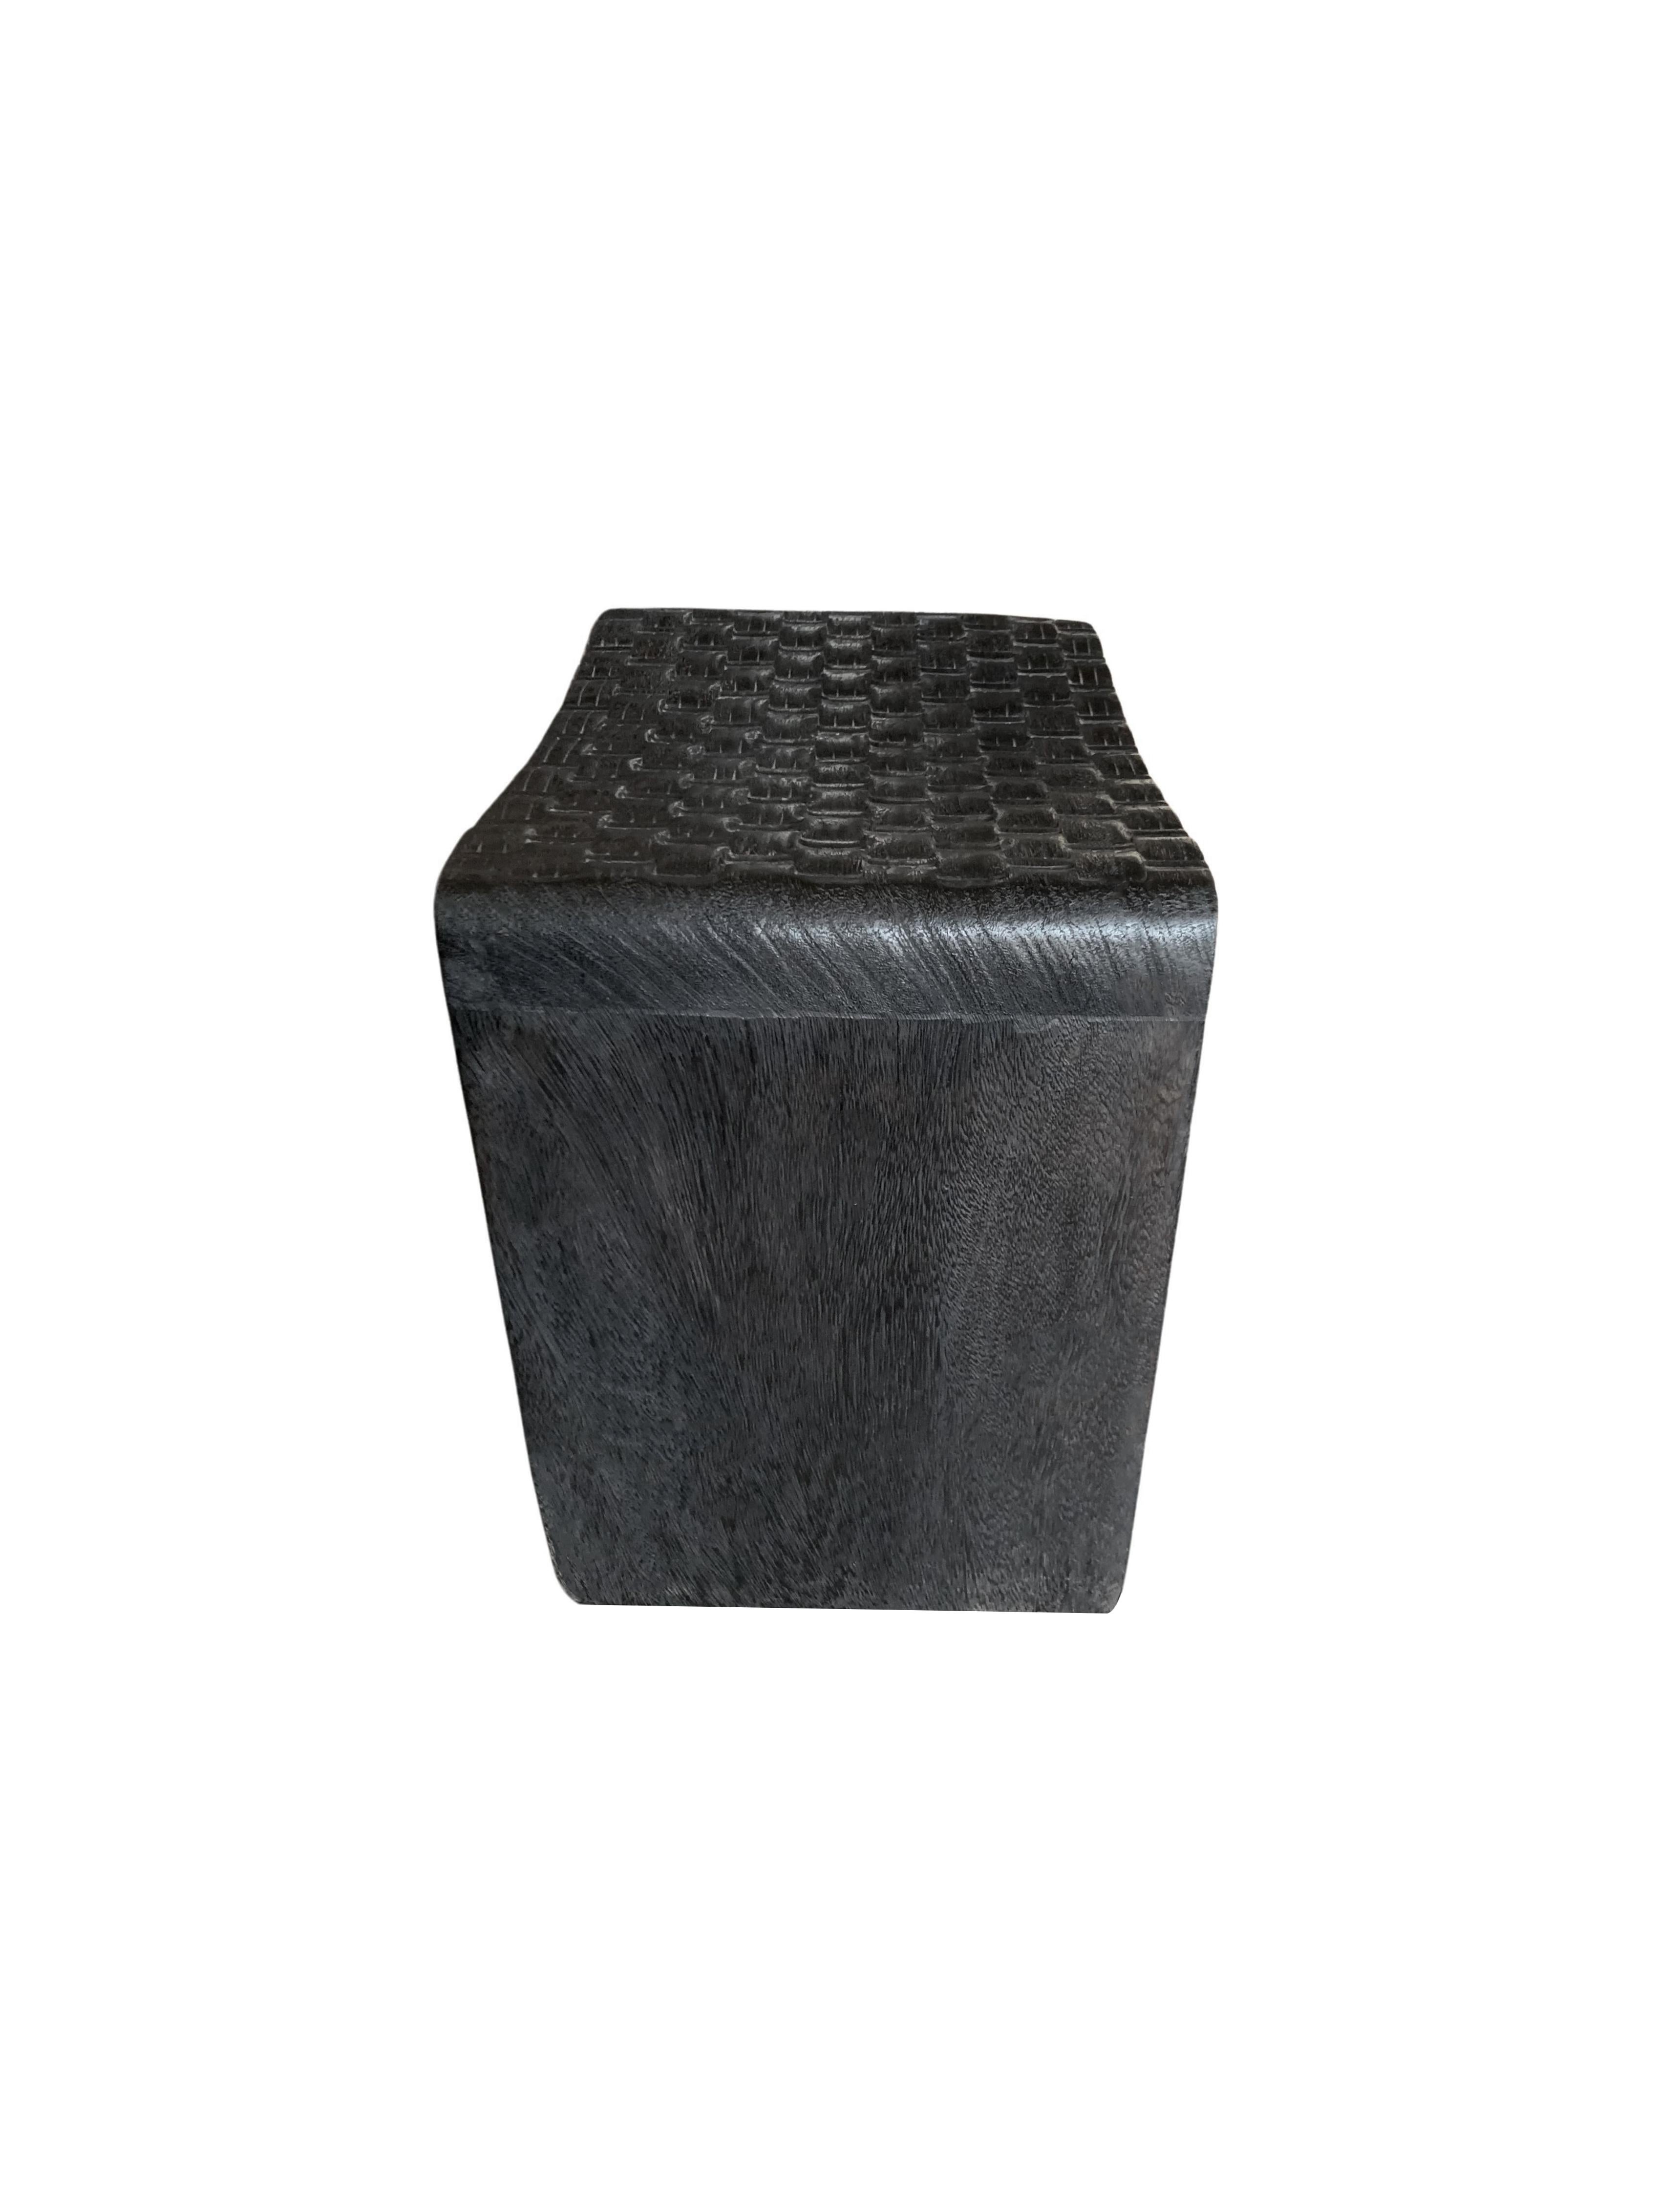 Sculptural Mango Wood Stool with Carved Detailing & Burnt Finish Modern Organic In New Condition For Sale In Jimbaran, Bali